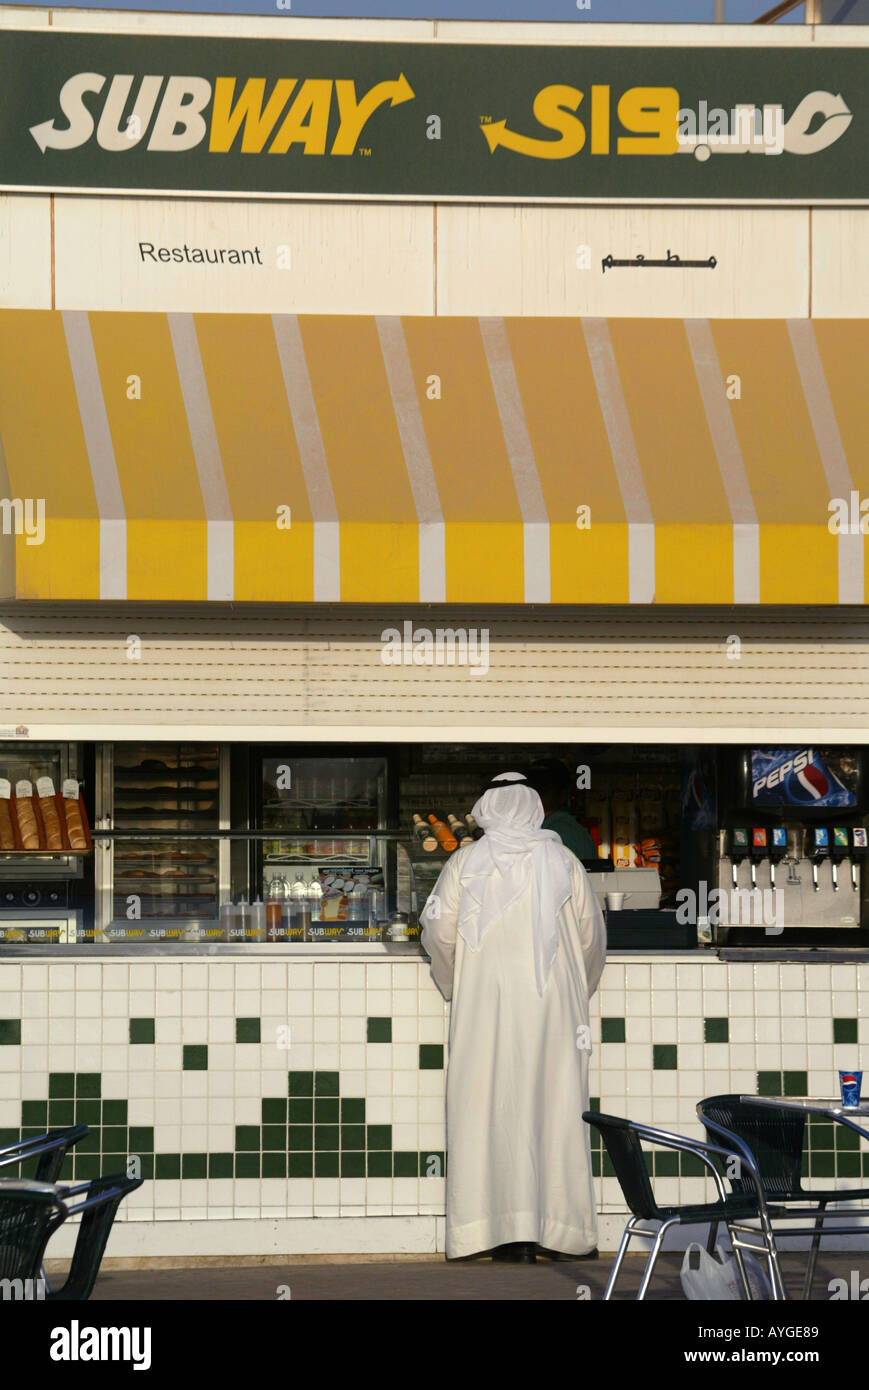 A Kuwati man in thaub traditional clothing orders at a Subway fast food restaurant along the Sharq Pier in Kuwait City. Stock Photo